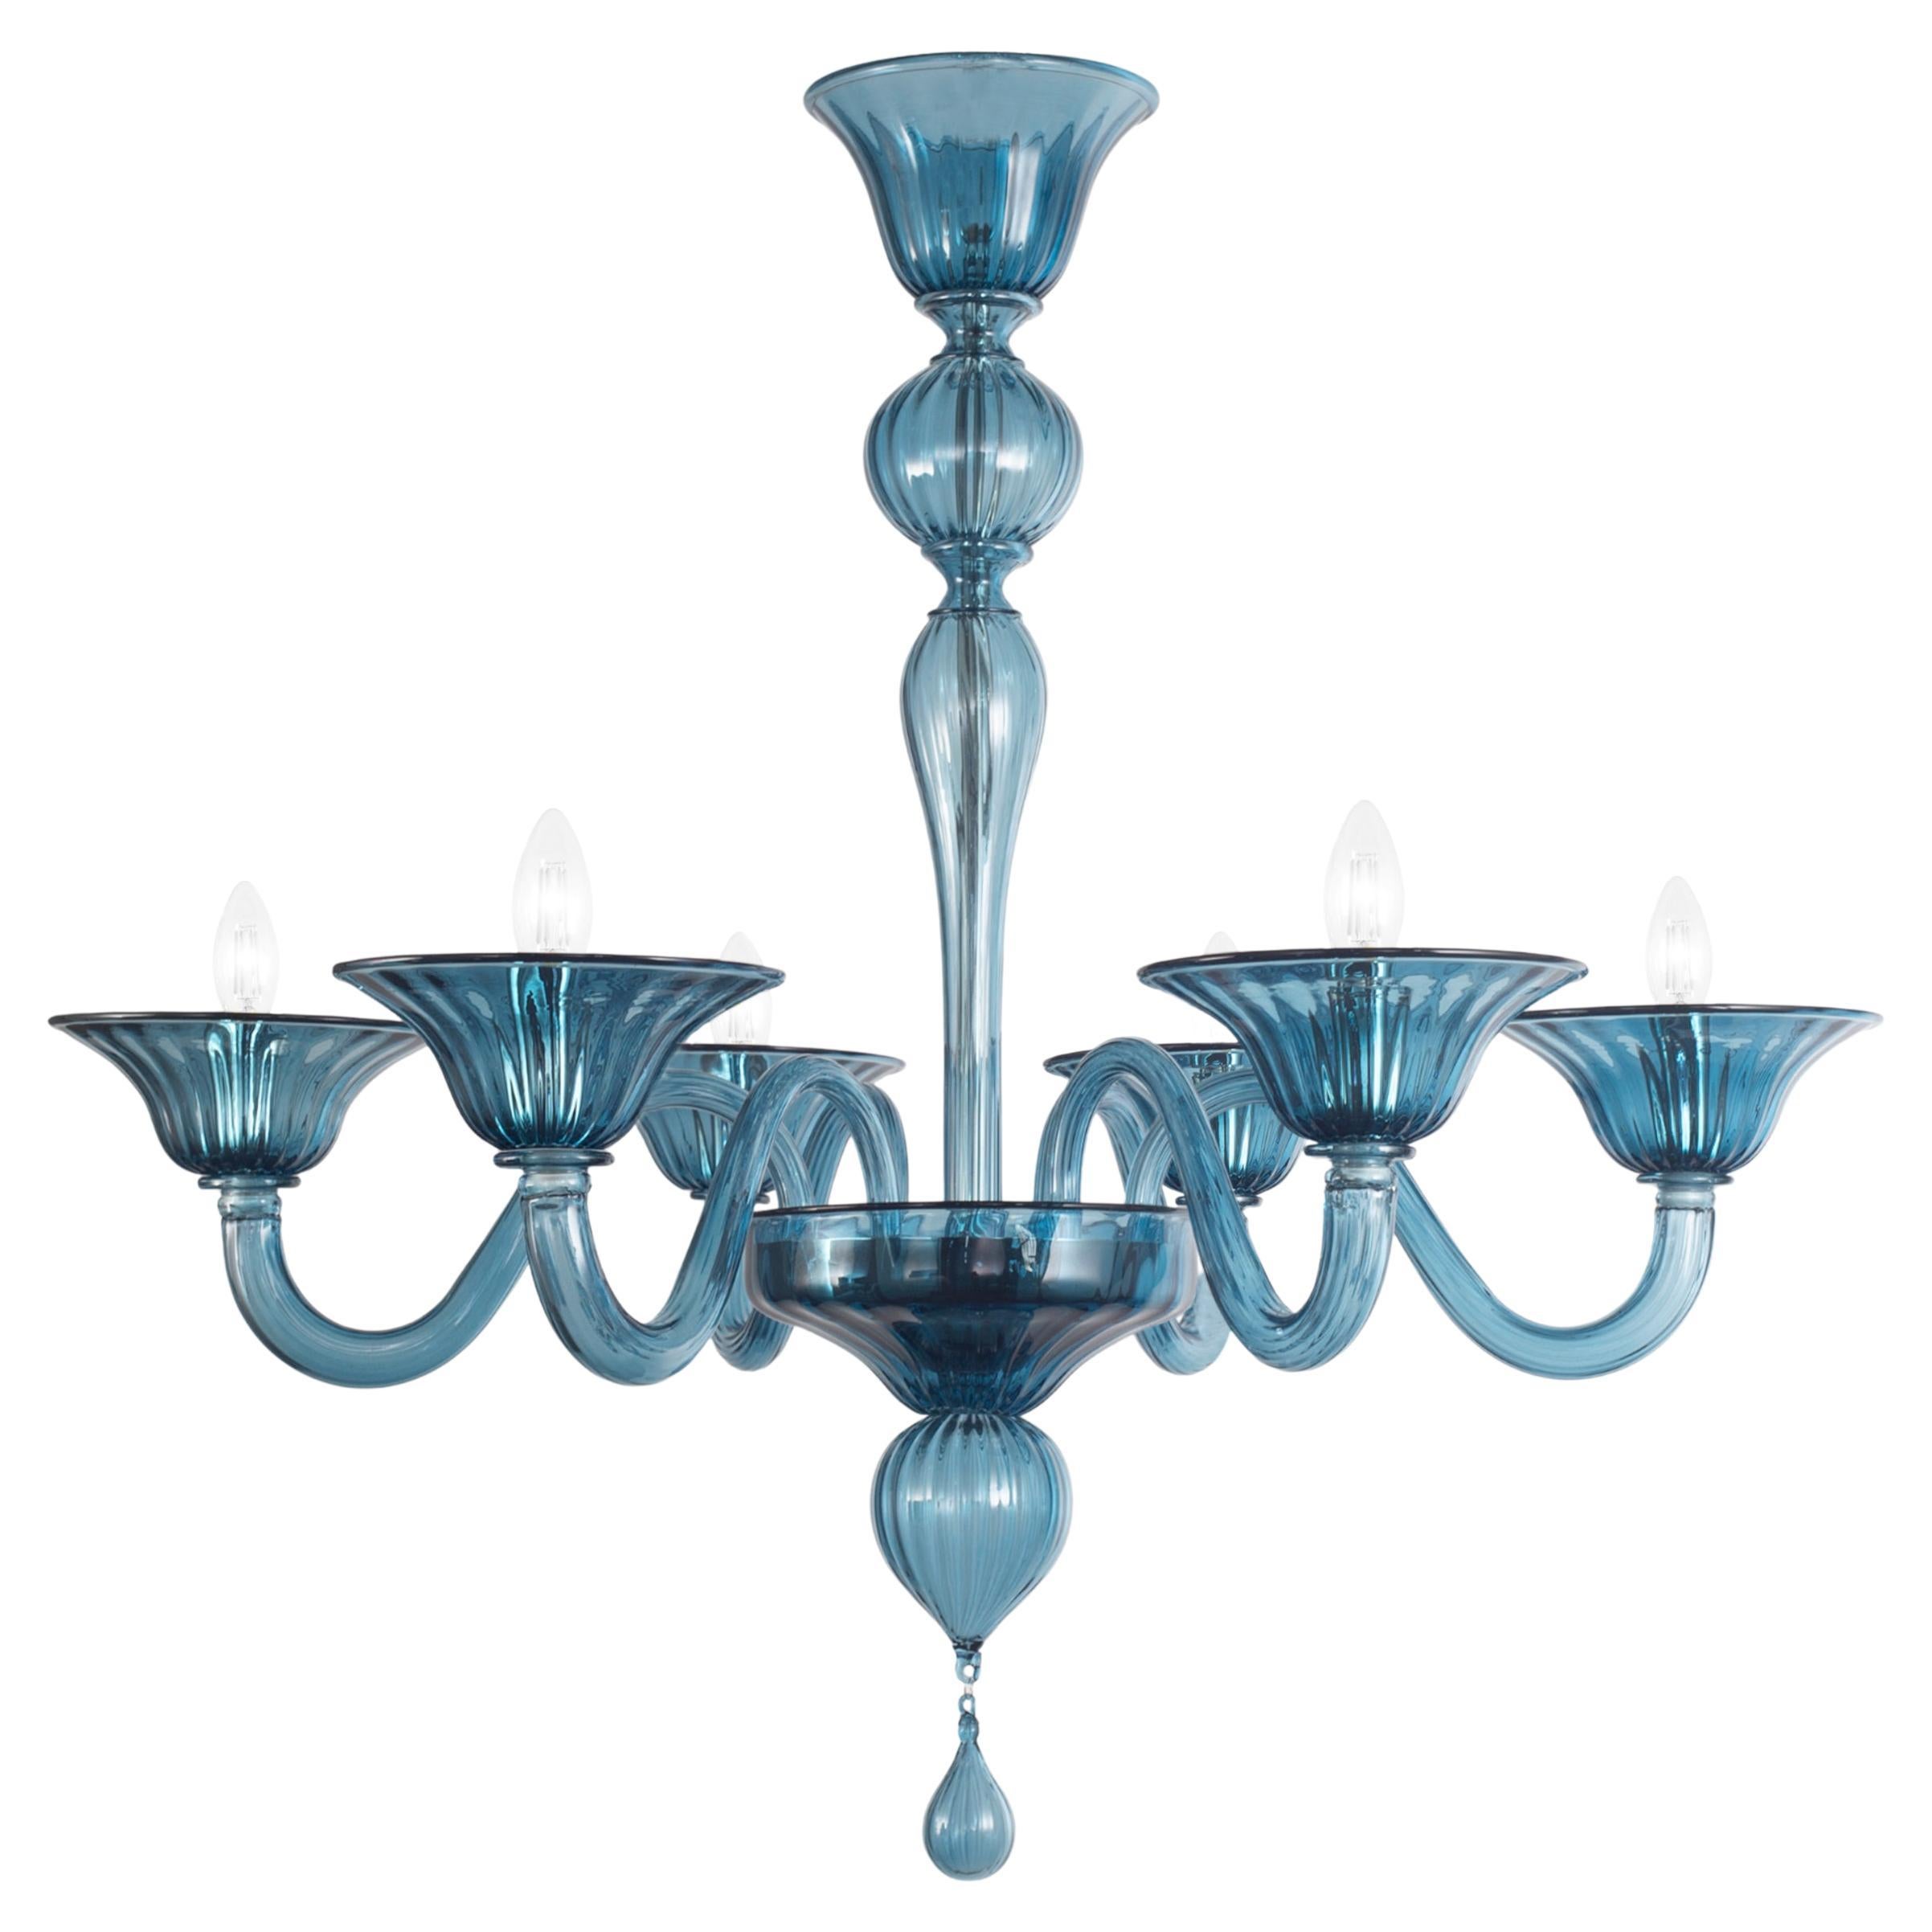 Simplicissimus Chandelier, 6 Arms Teal Blue Murano Glass by Multiforme in Stock